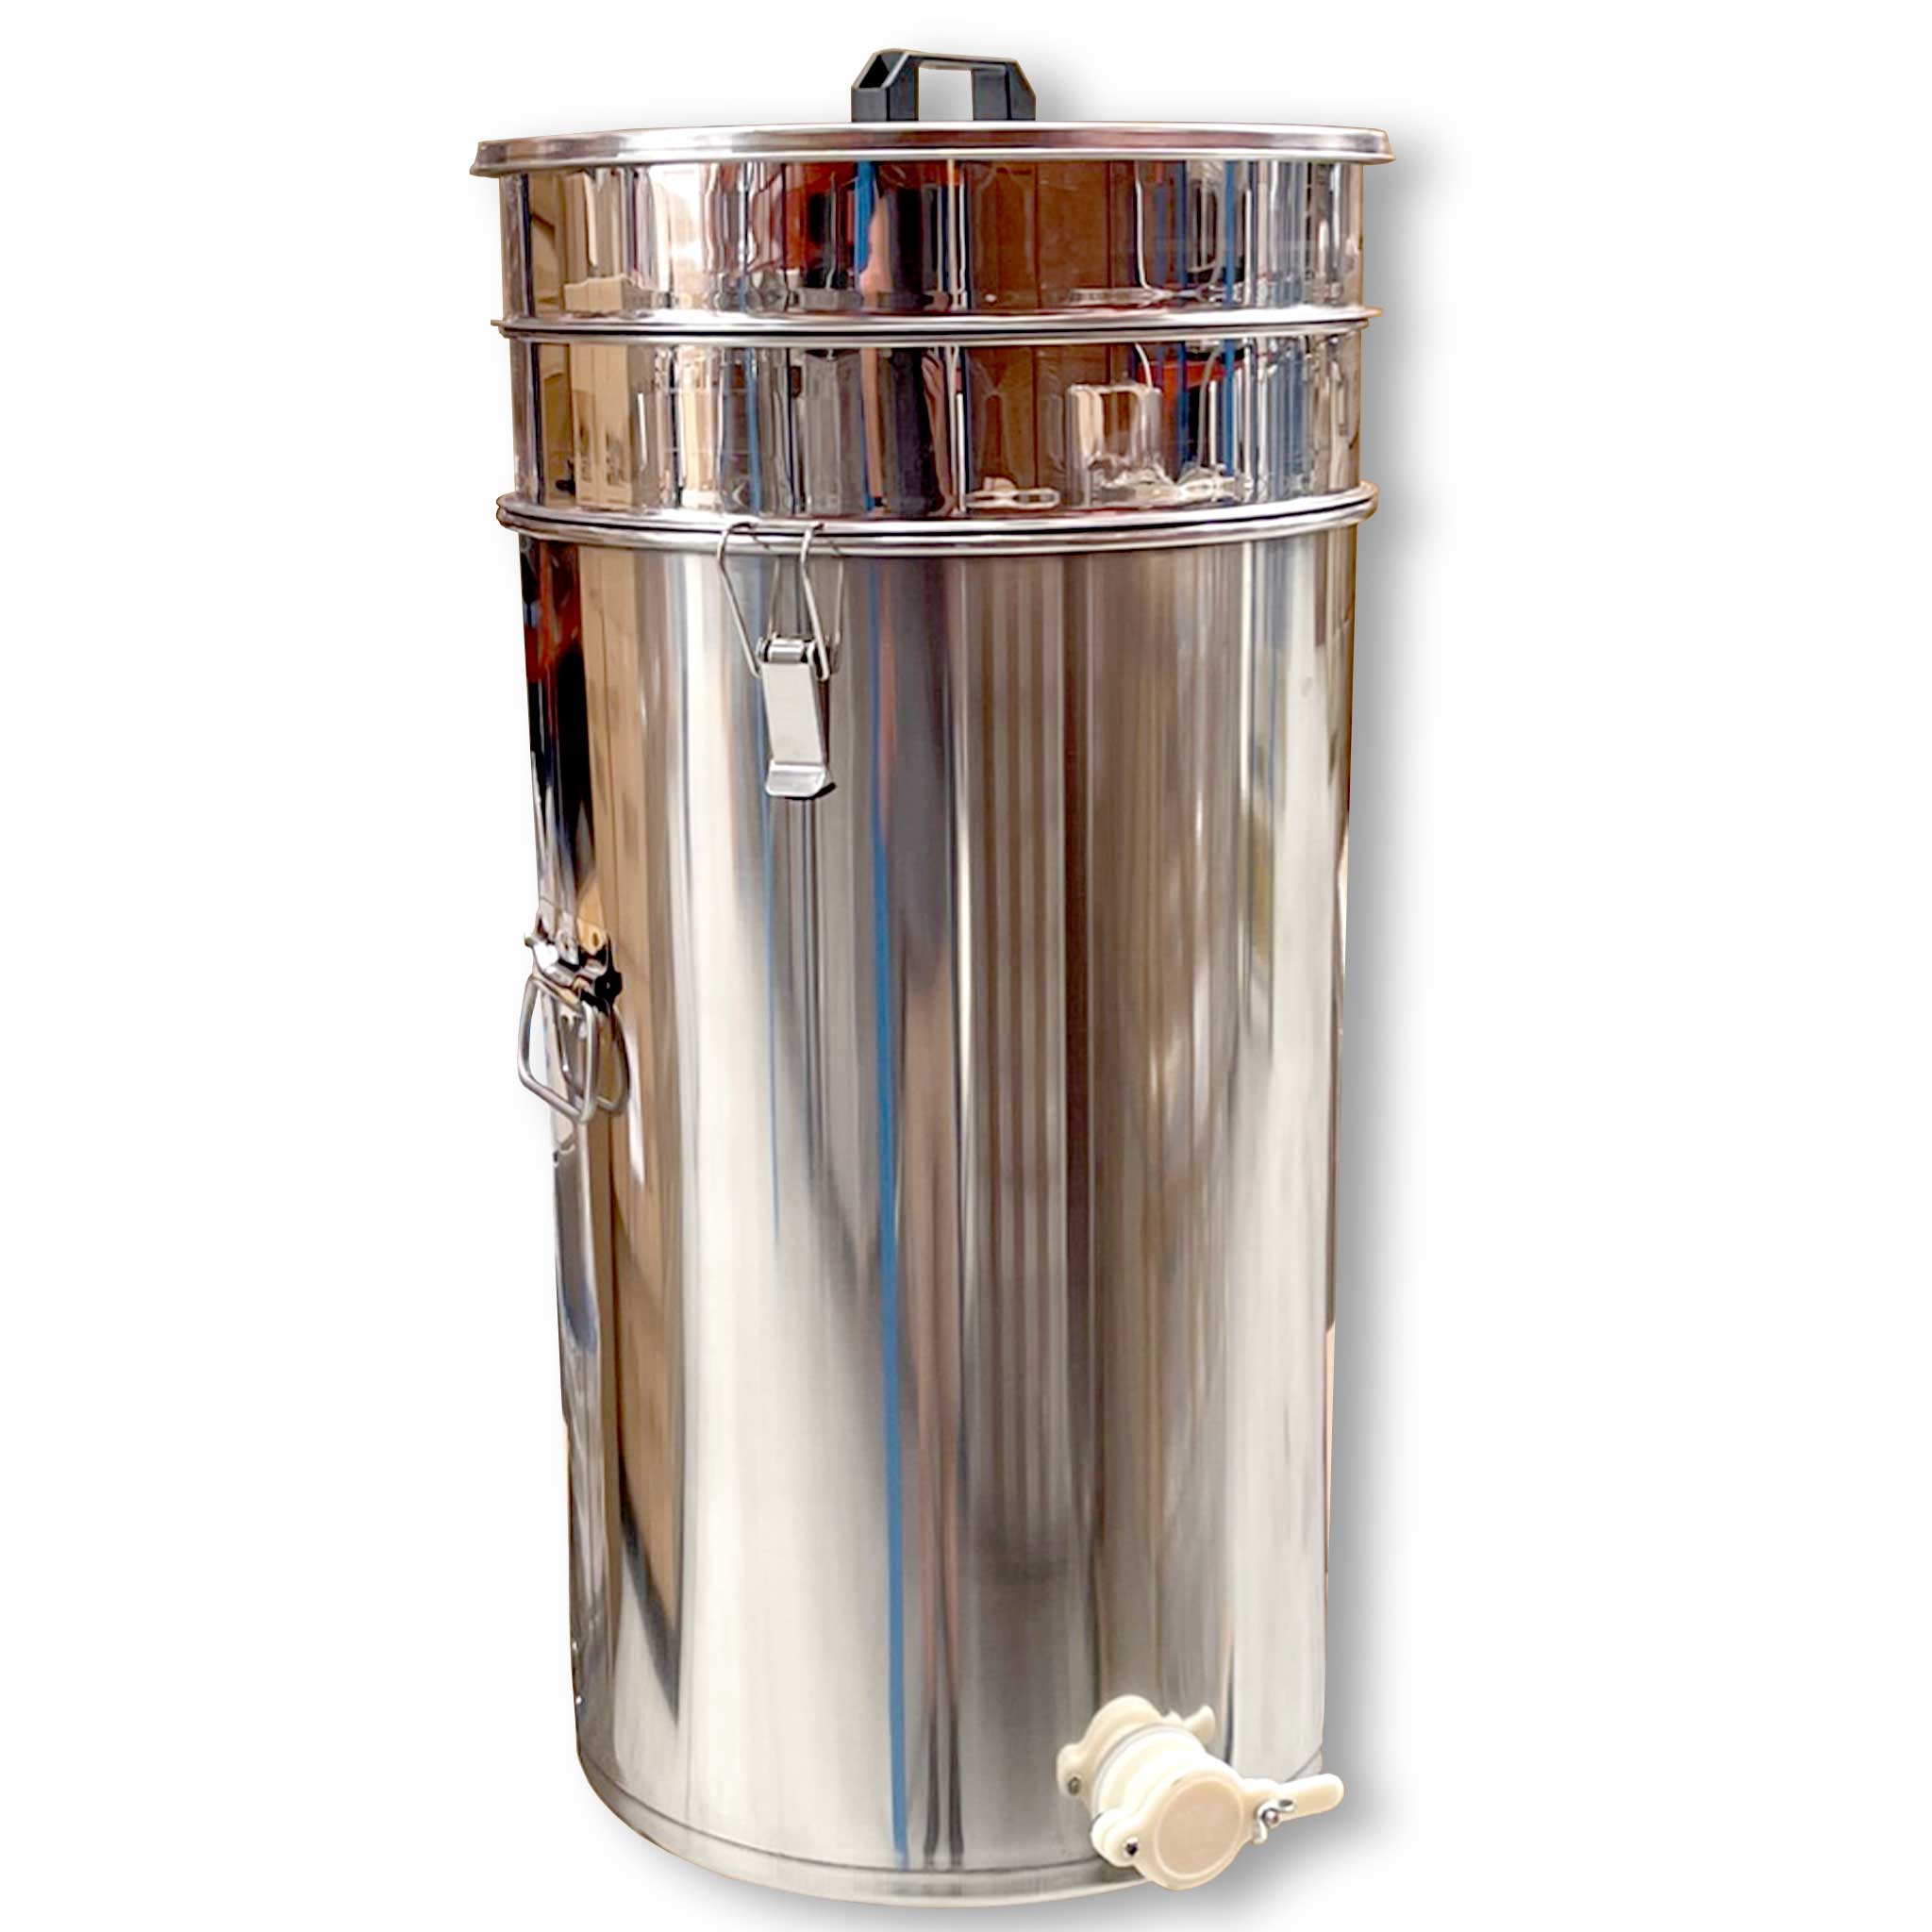 Honey Tank with double strainer - 75L - Processing collection by Buzzbee Beekeeping Supplies